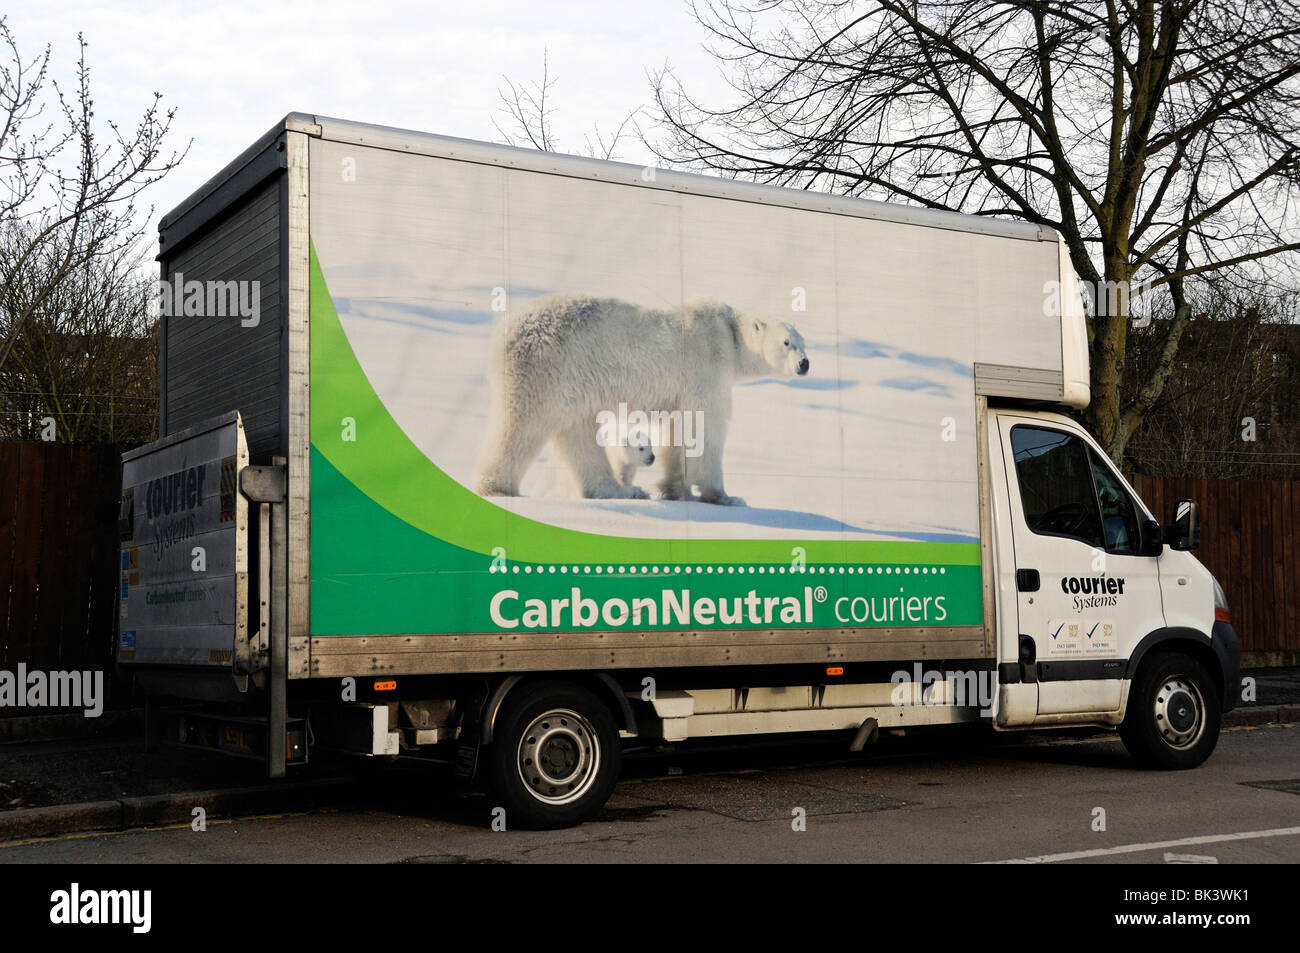 Delivery van with Carbon Neutral Couriers on side Highbury London England UK Stock Photo